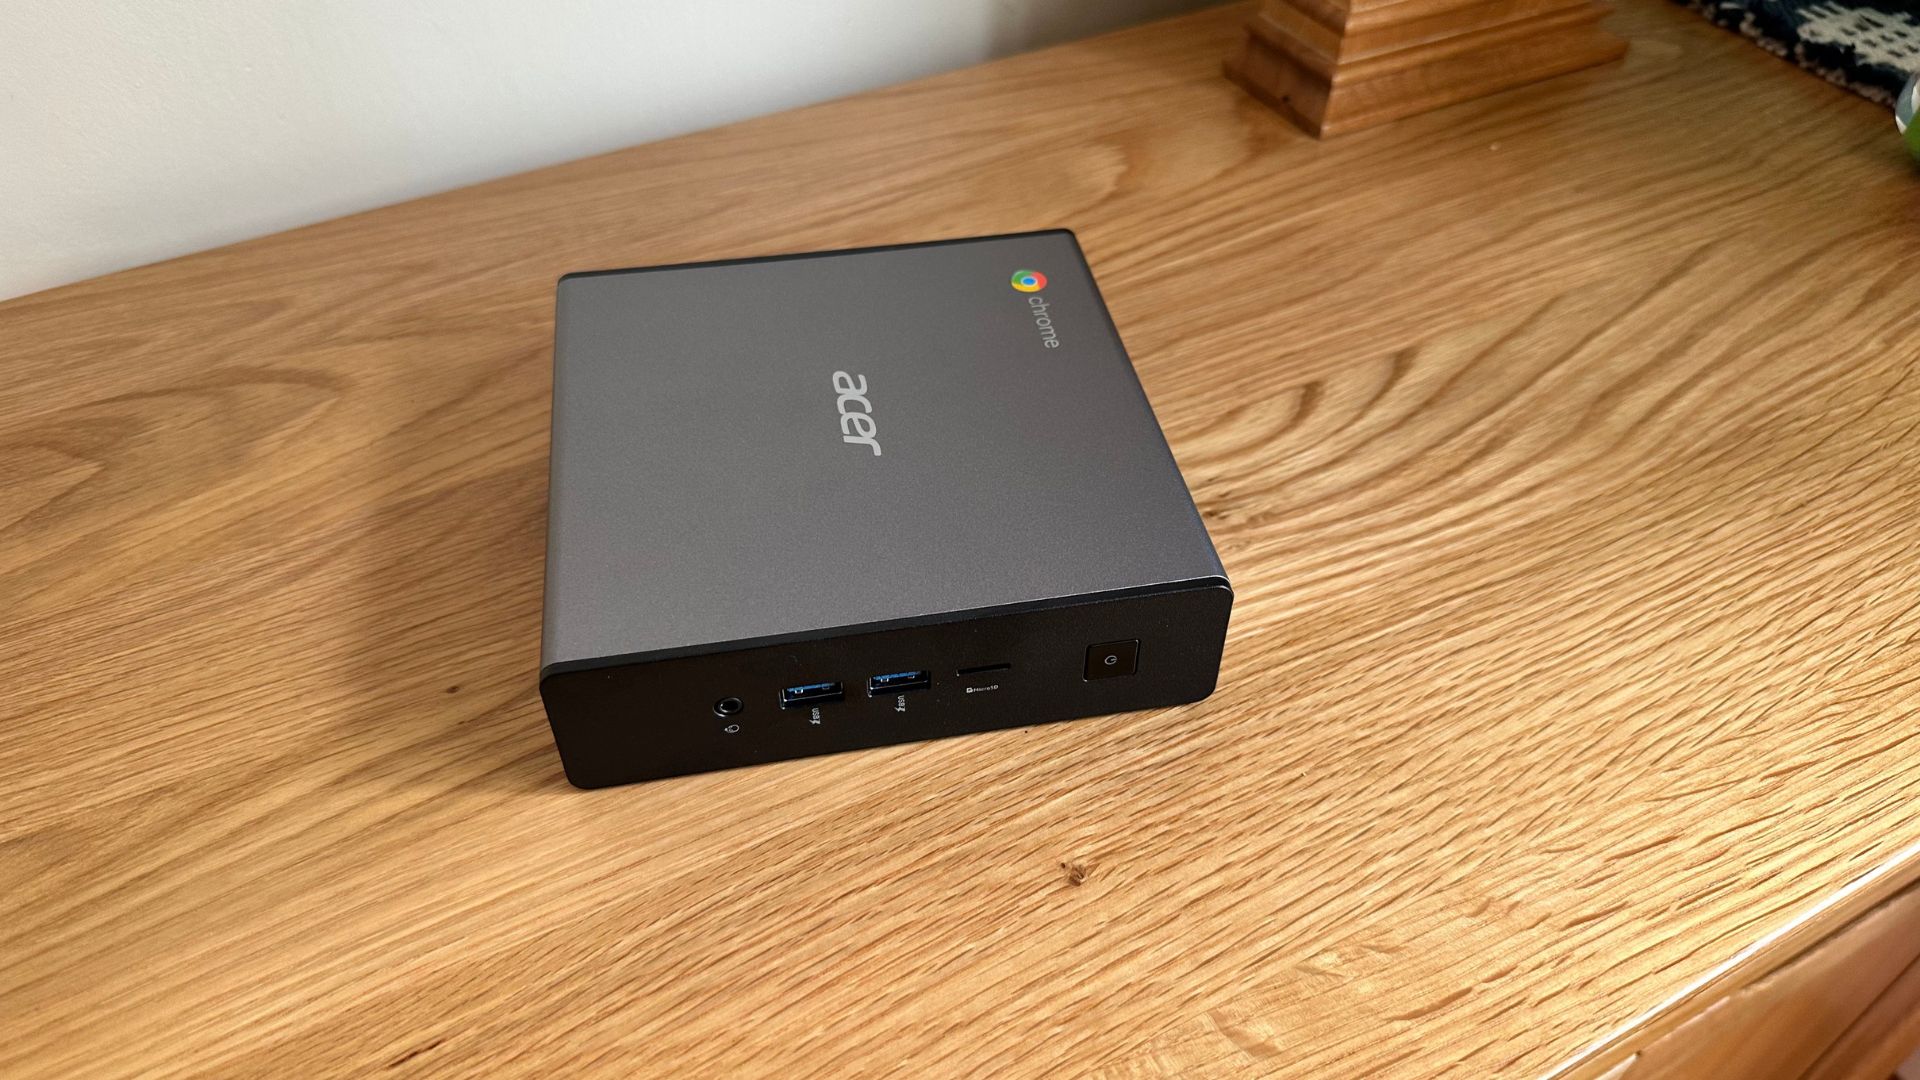 Acer Chromebox mini PC on a wooden sideboard